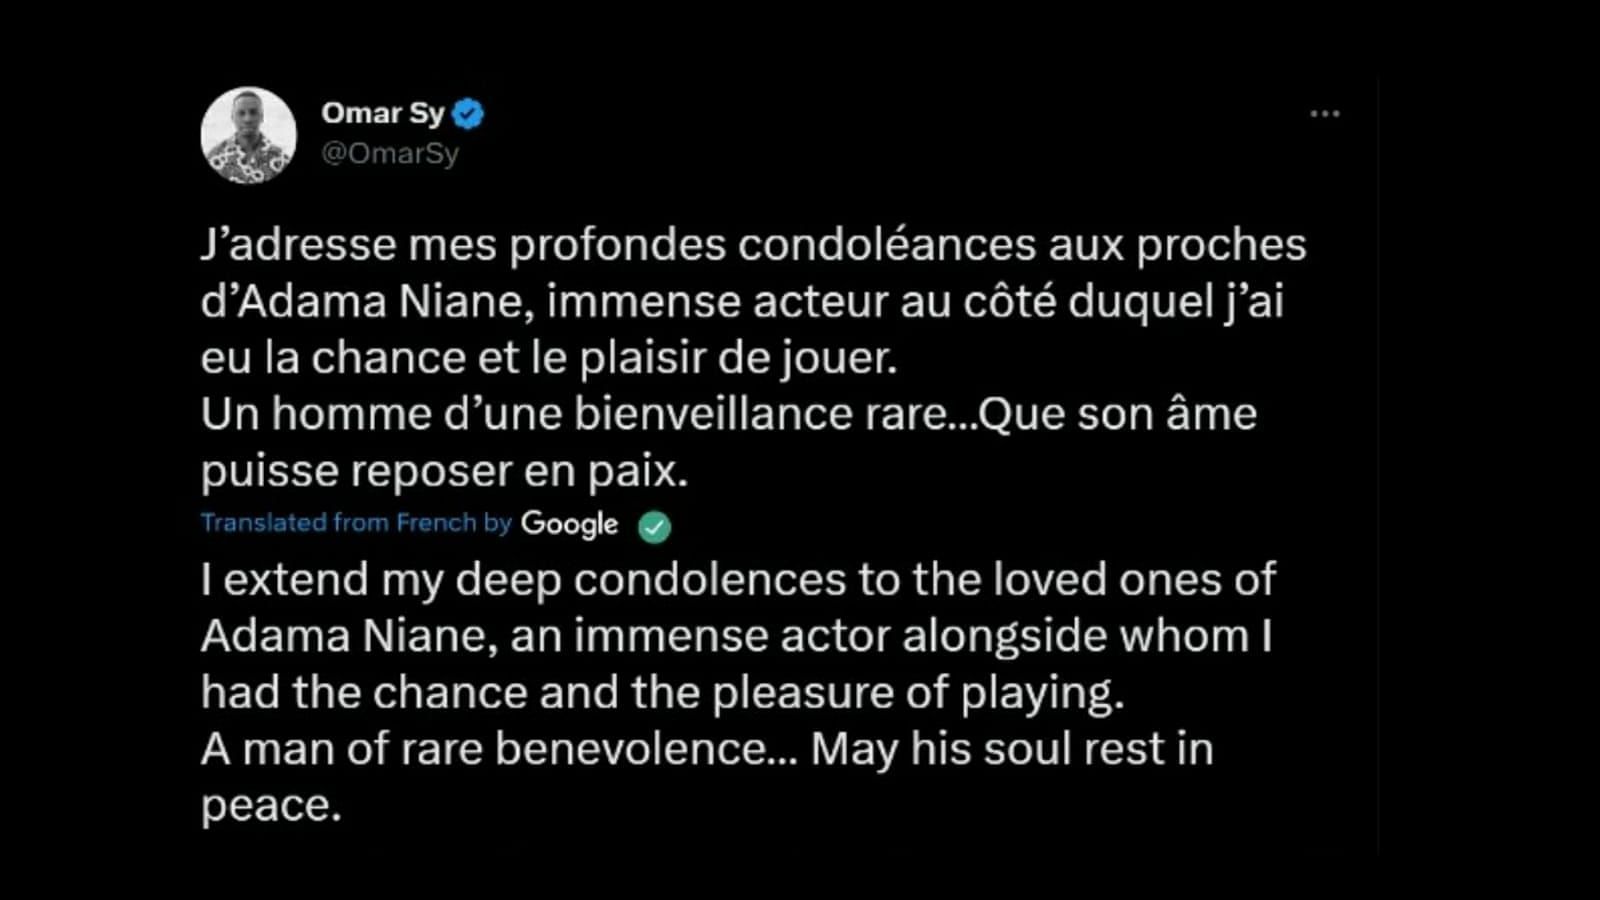 Omar Sy mourns the loss of the actor (Image via Twitter)